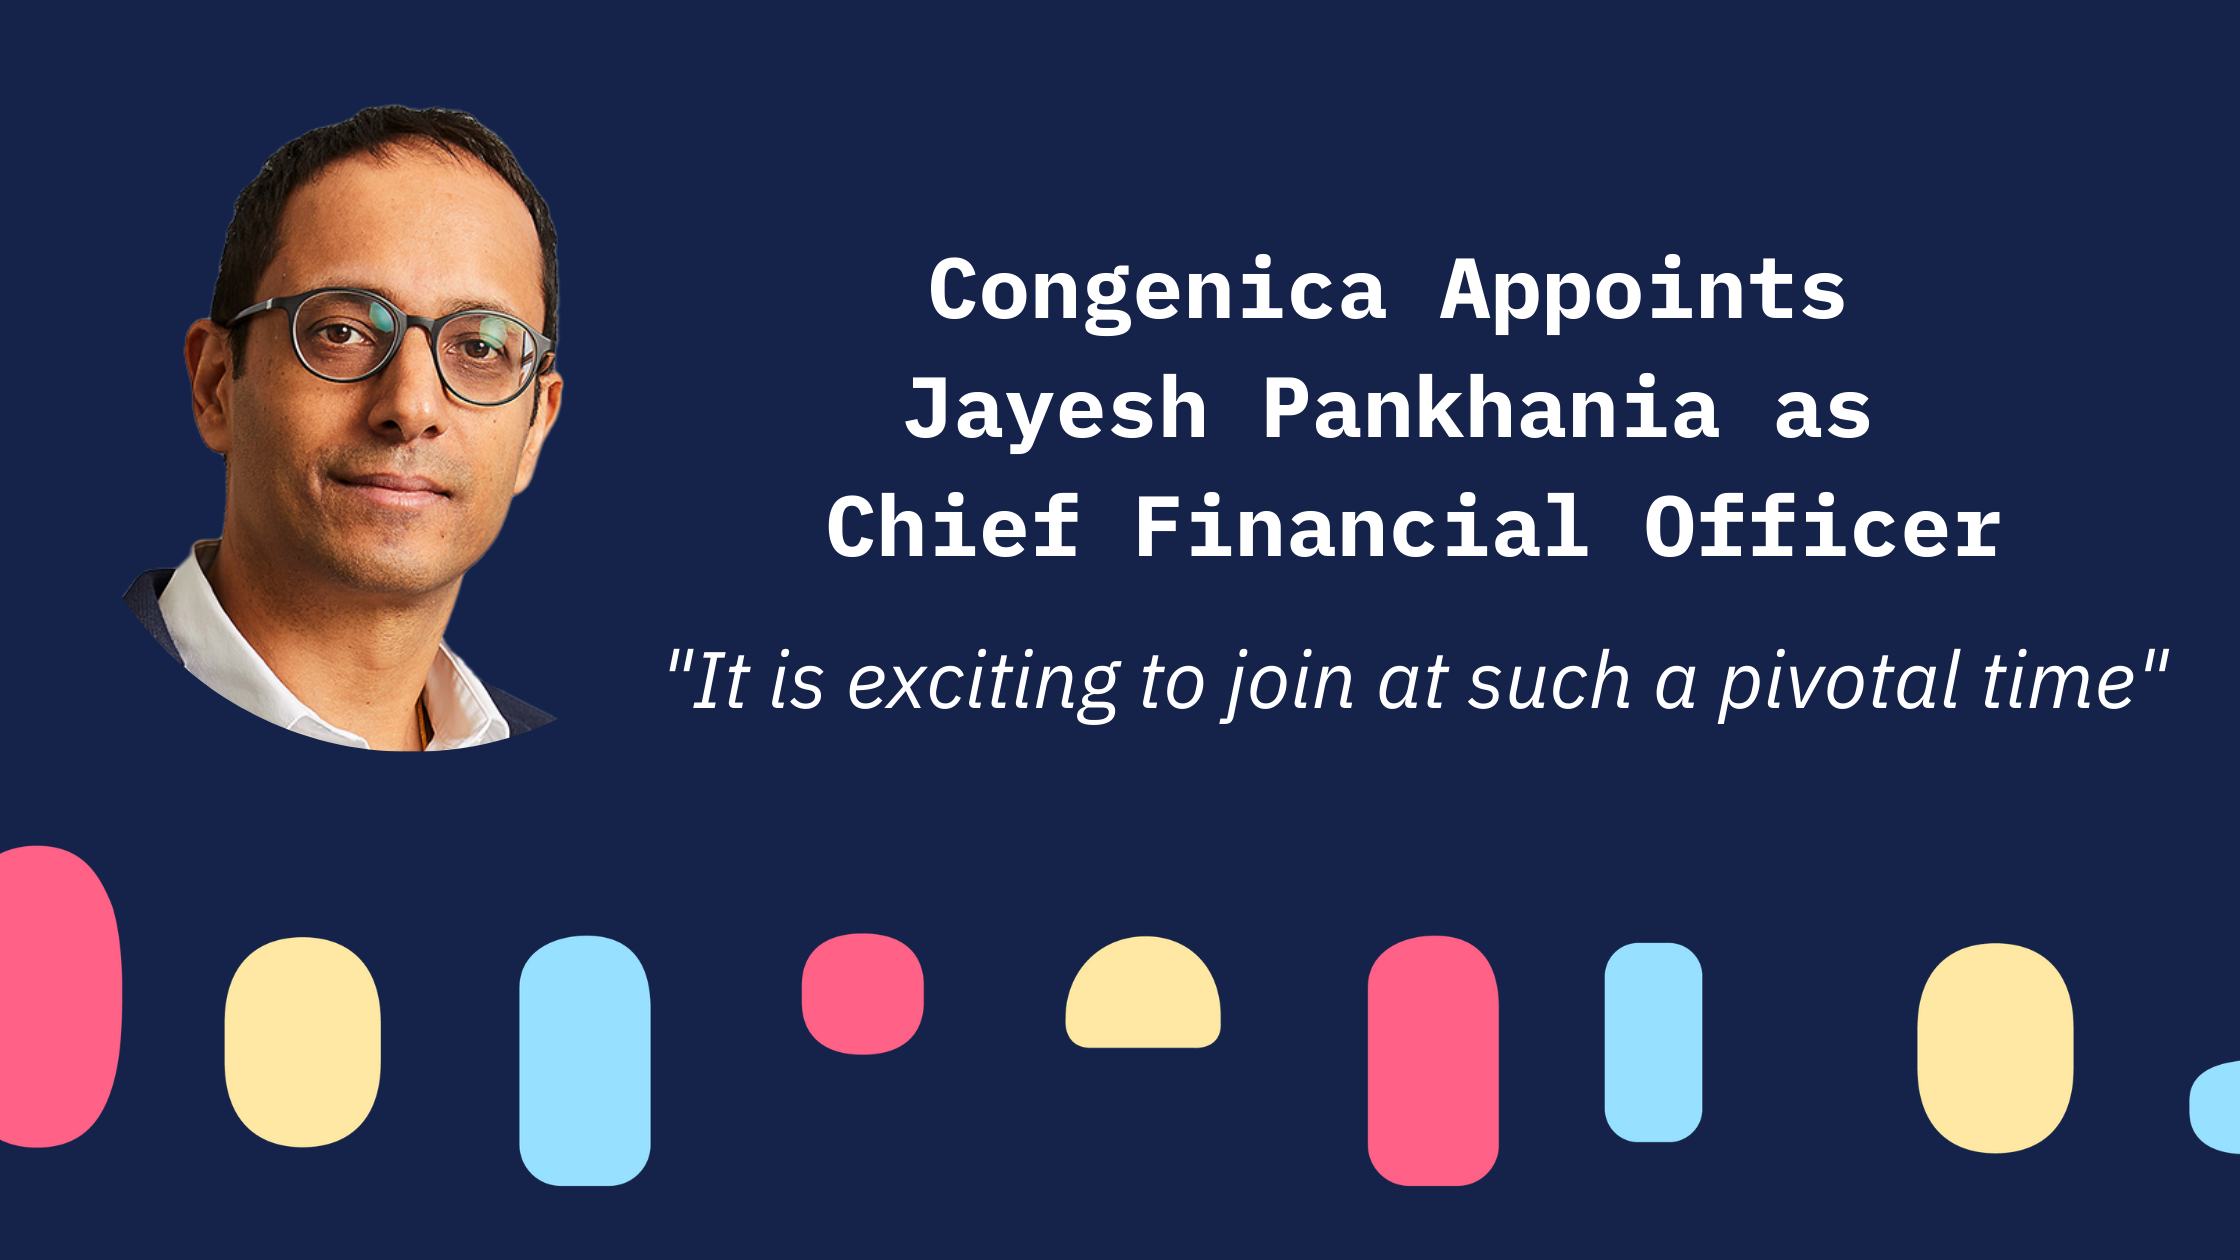 Congenica Appoints Jayesh Pankhania as Chief Financial Officer